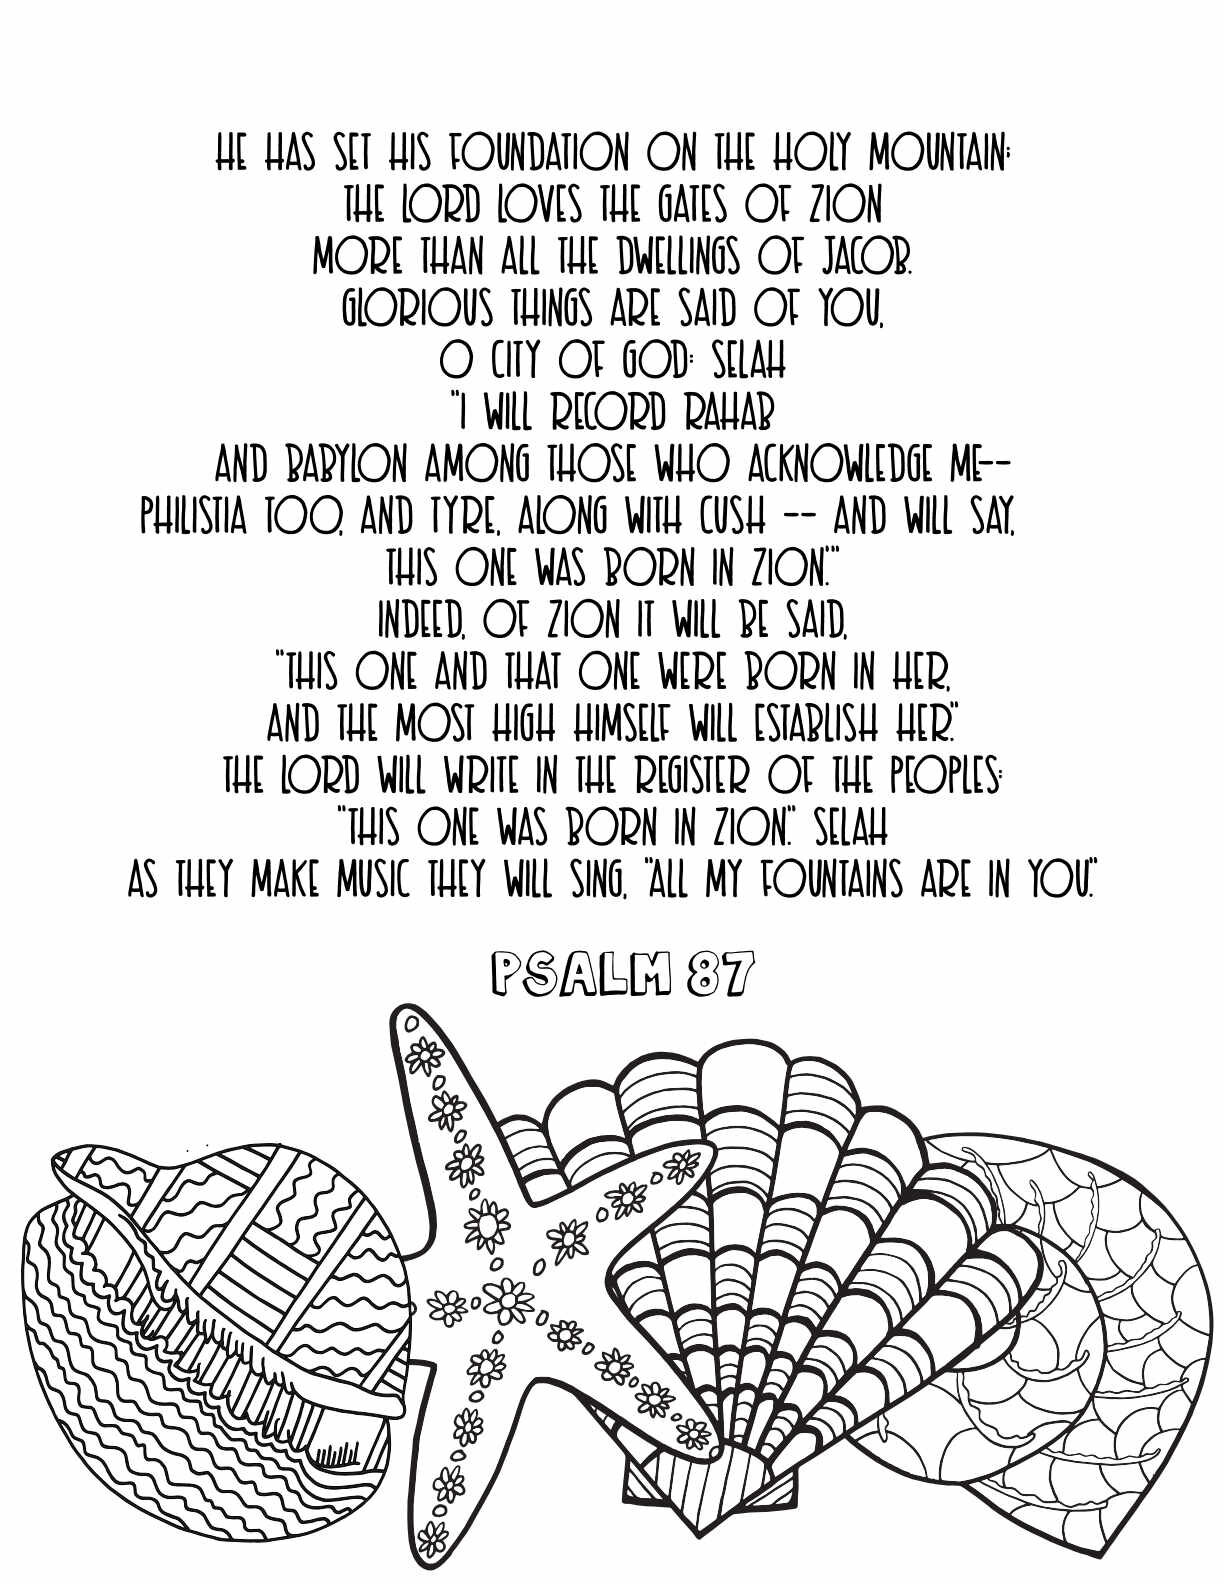 10 Free Printable Psalm Coloring Pages - Download and Color Adult Scripture - Psalm 87 CLICK HERE TO DOWNLOAD THIS PAGE FREE